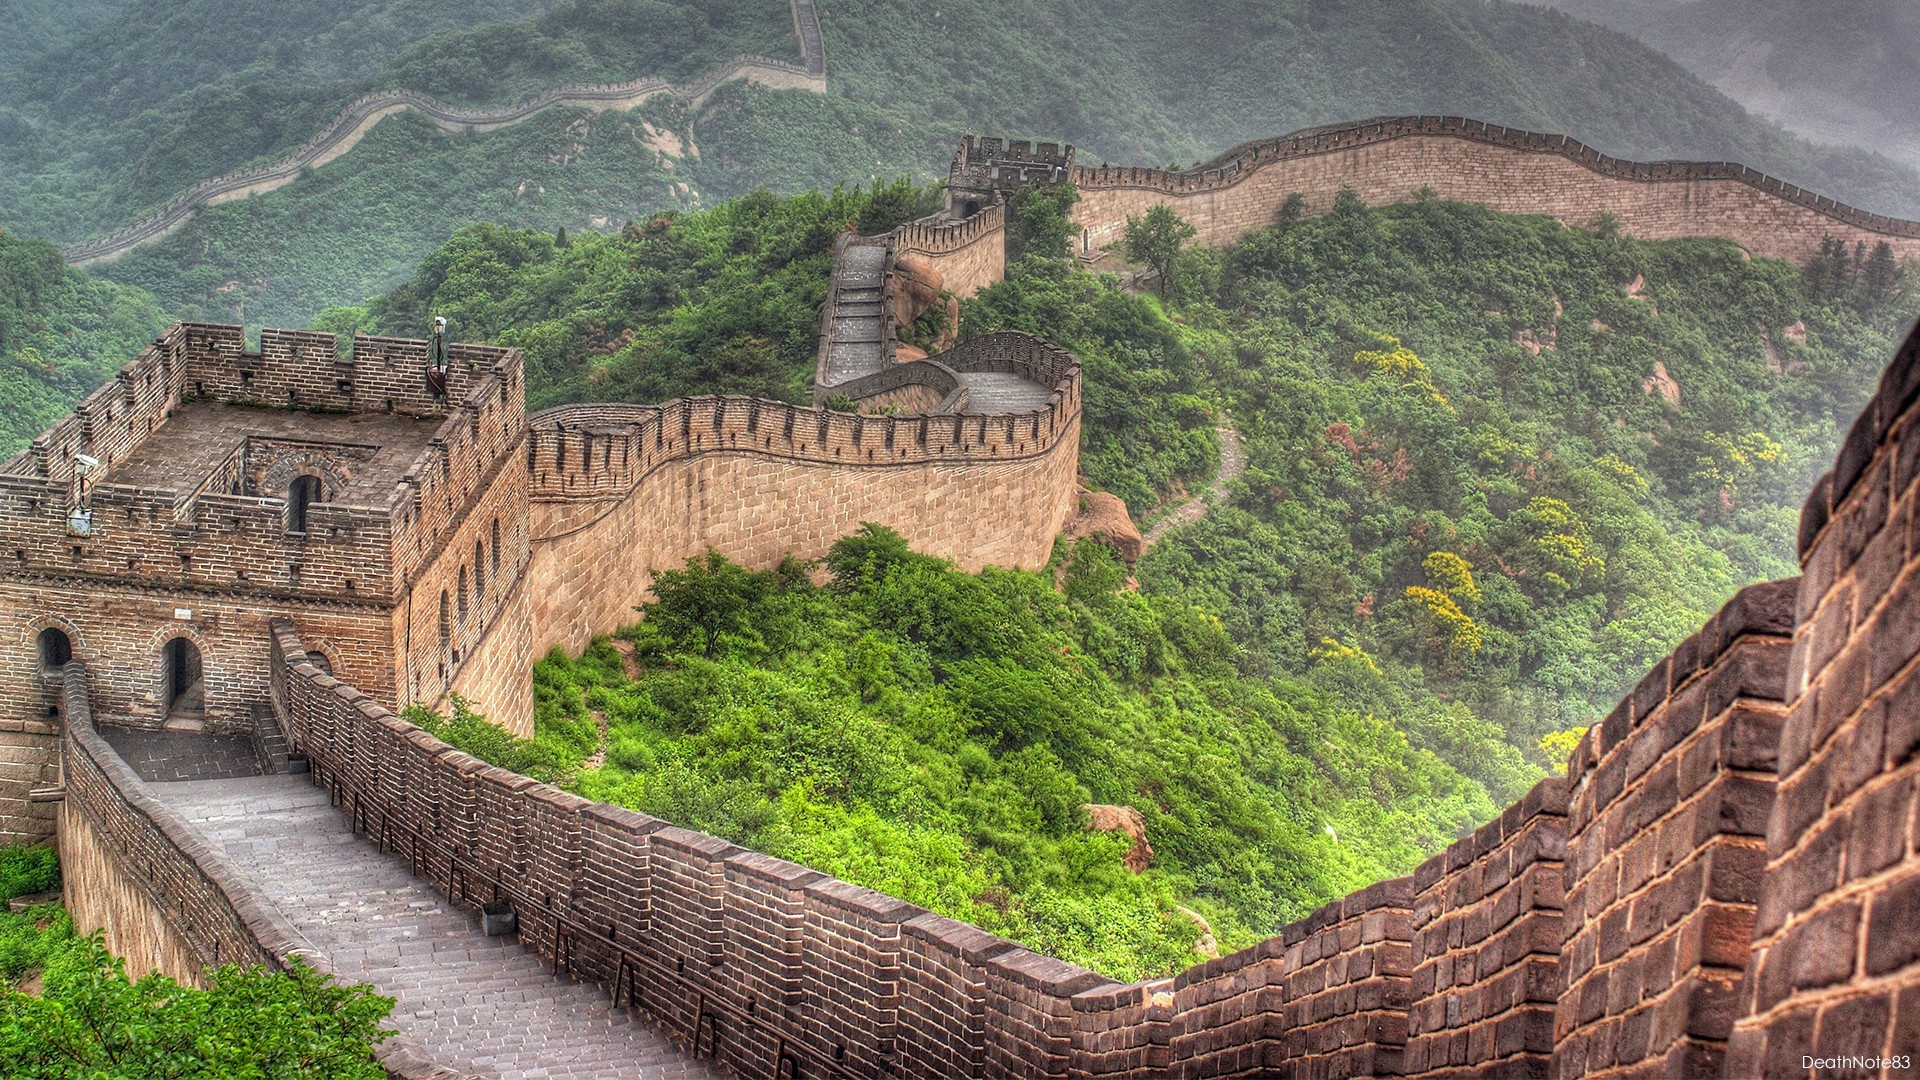 Great Wall of China: The longest man-made structure in the world, Wanli Changcheng. 1920x1080 Full HD Wallpaper.